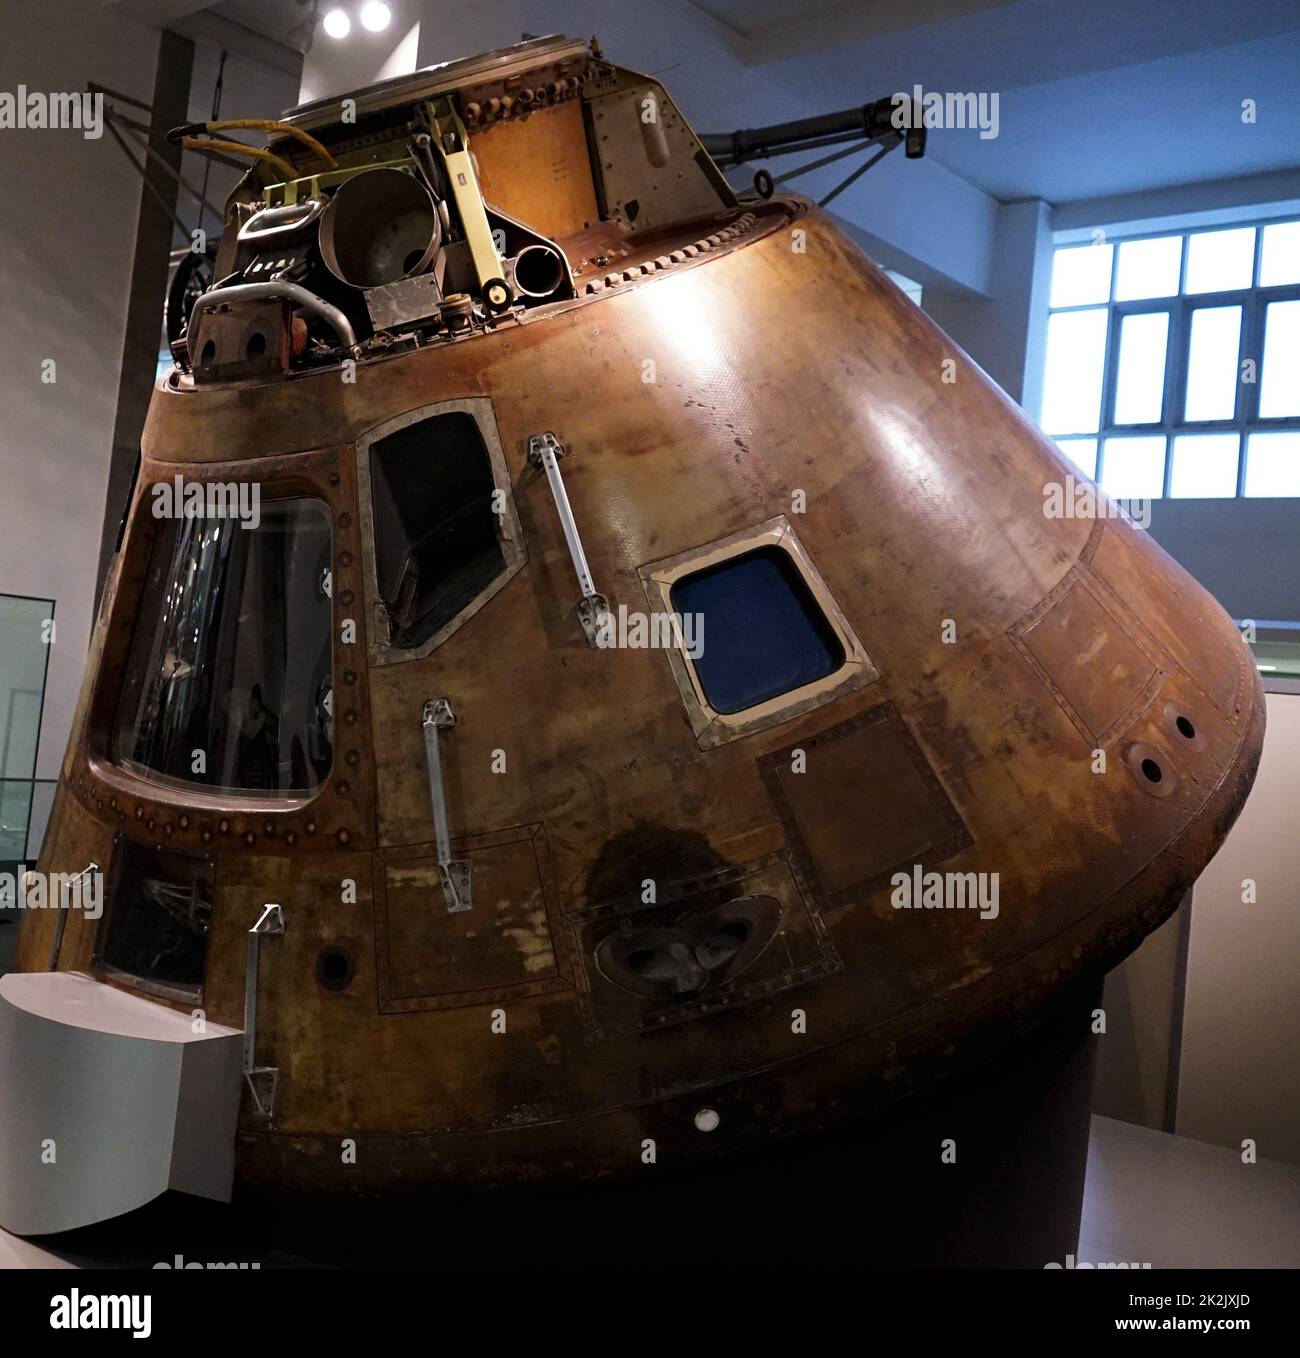 The Apollo 10 Command Module, the fourth manned mission in the United States Apollo space program. Dated 20th Century Stock Photo